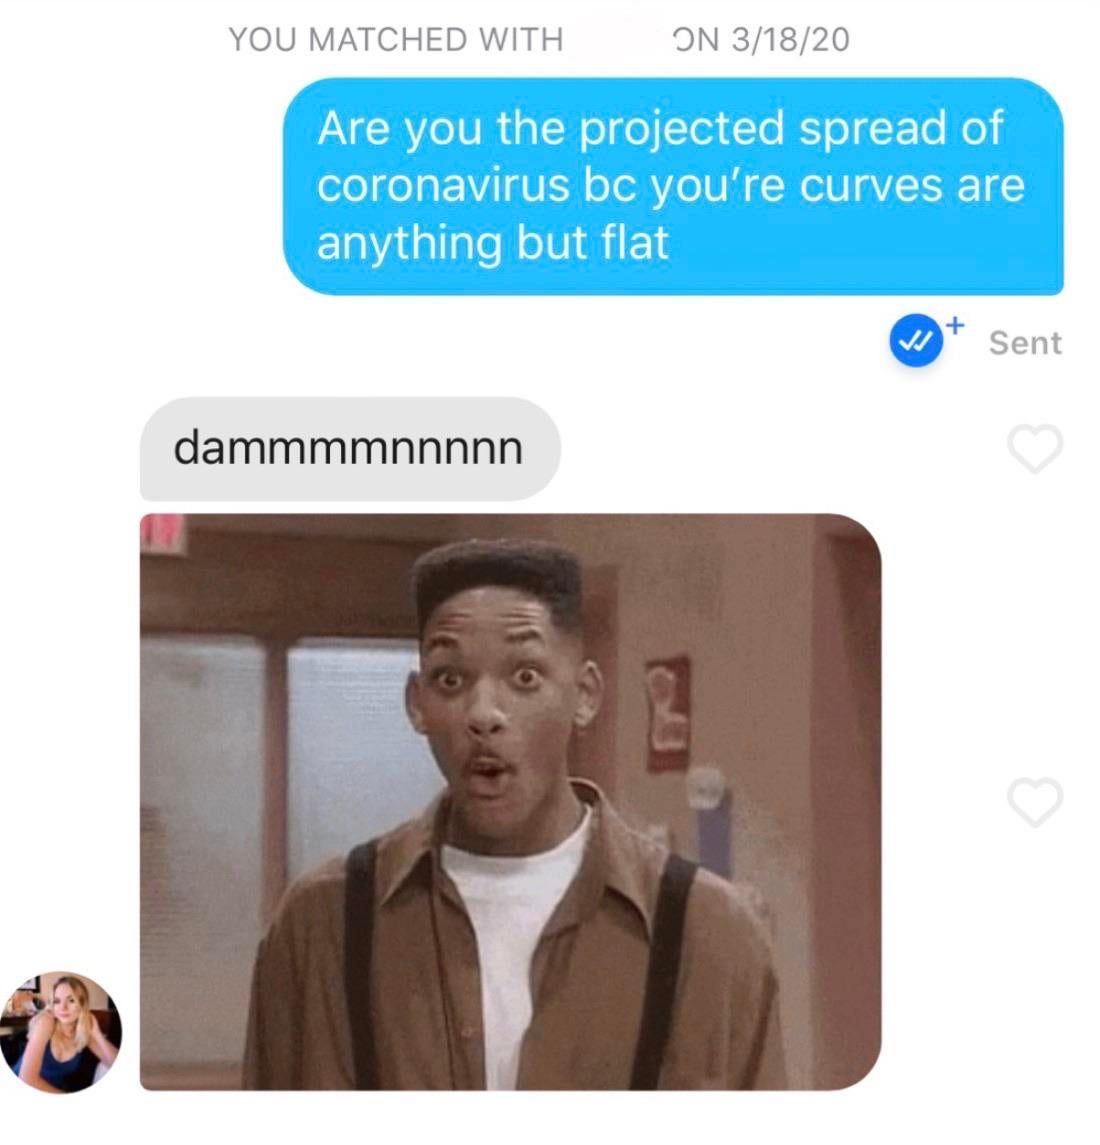 corona tinder - You Matched With On 31820 Are you the projected spread of coronavirus bc you're curves are anything but flat Sent dammmmnnnnn